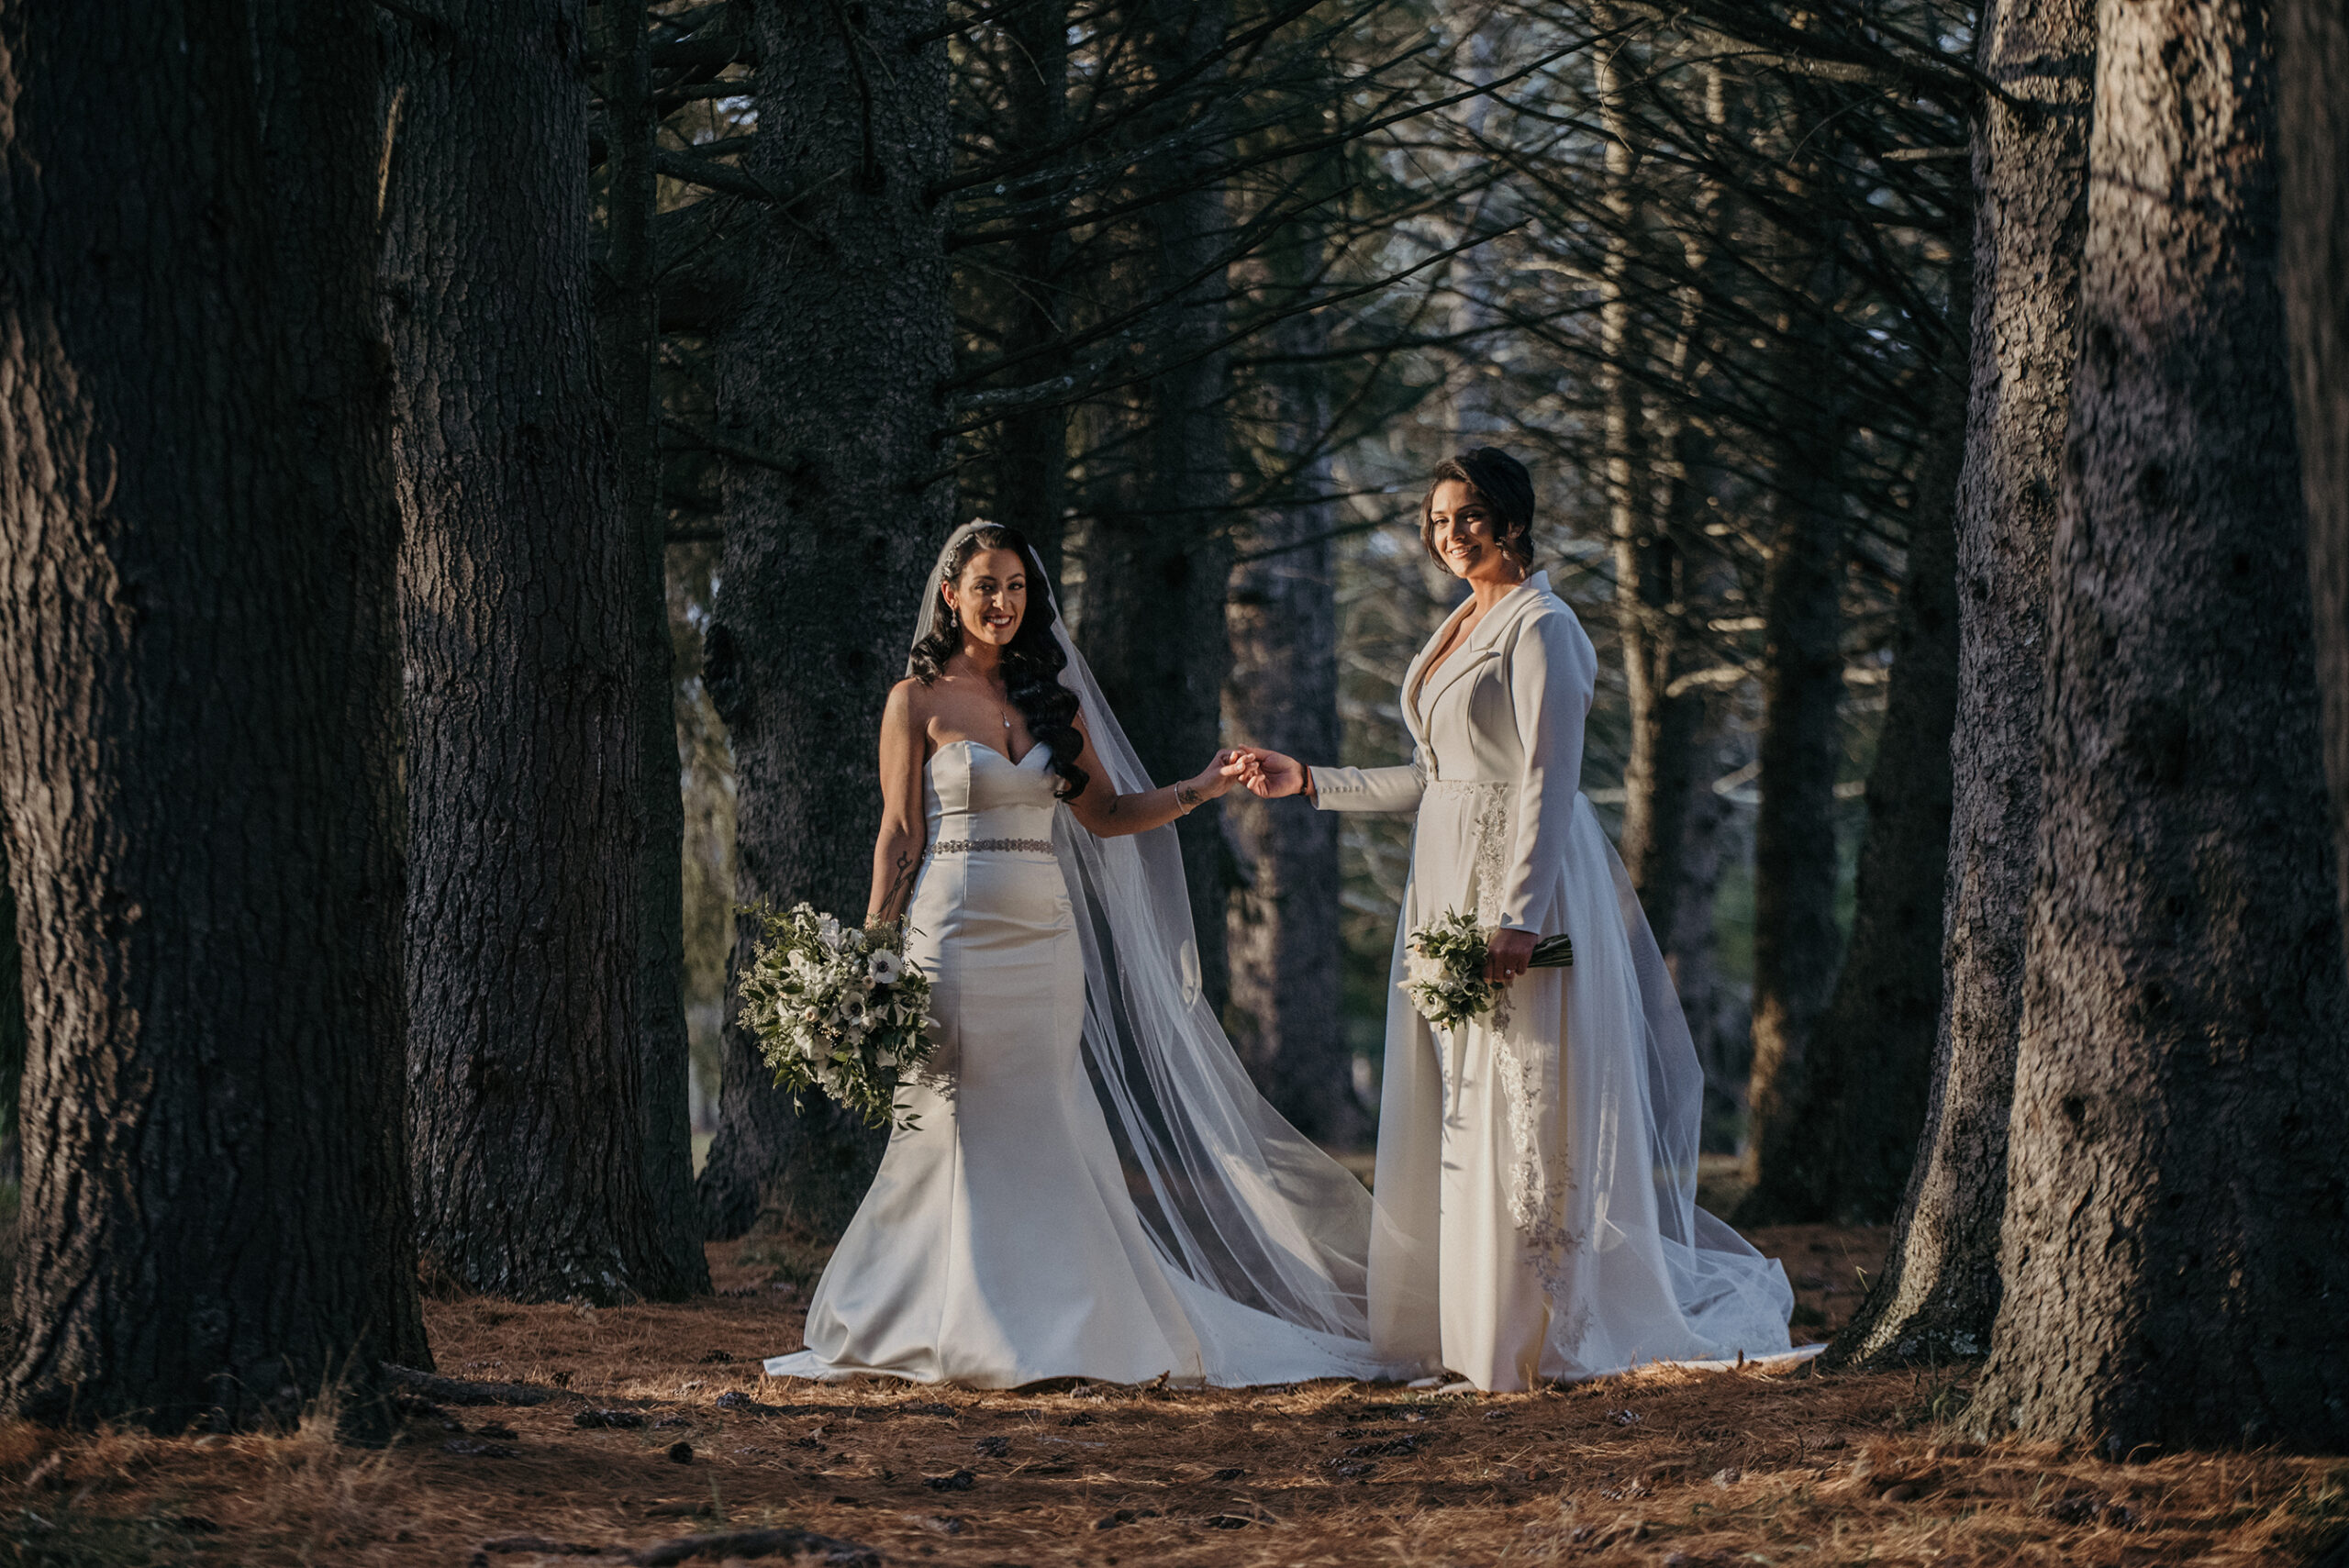 The brides in the forest on the grounds of the venue before their Perona Farm wedding.